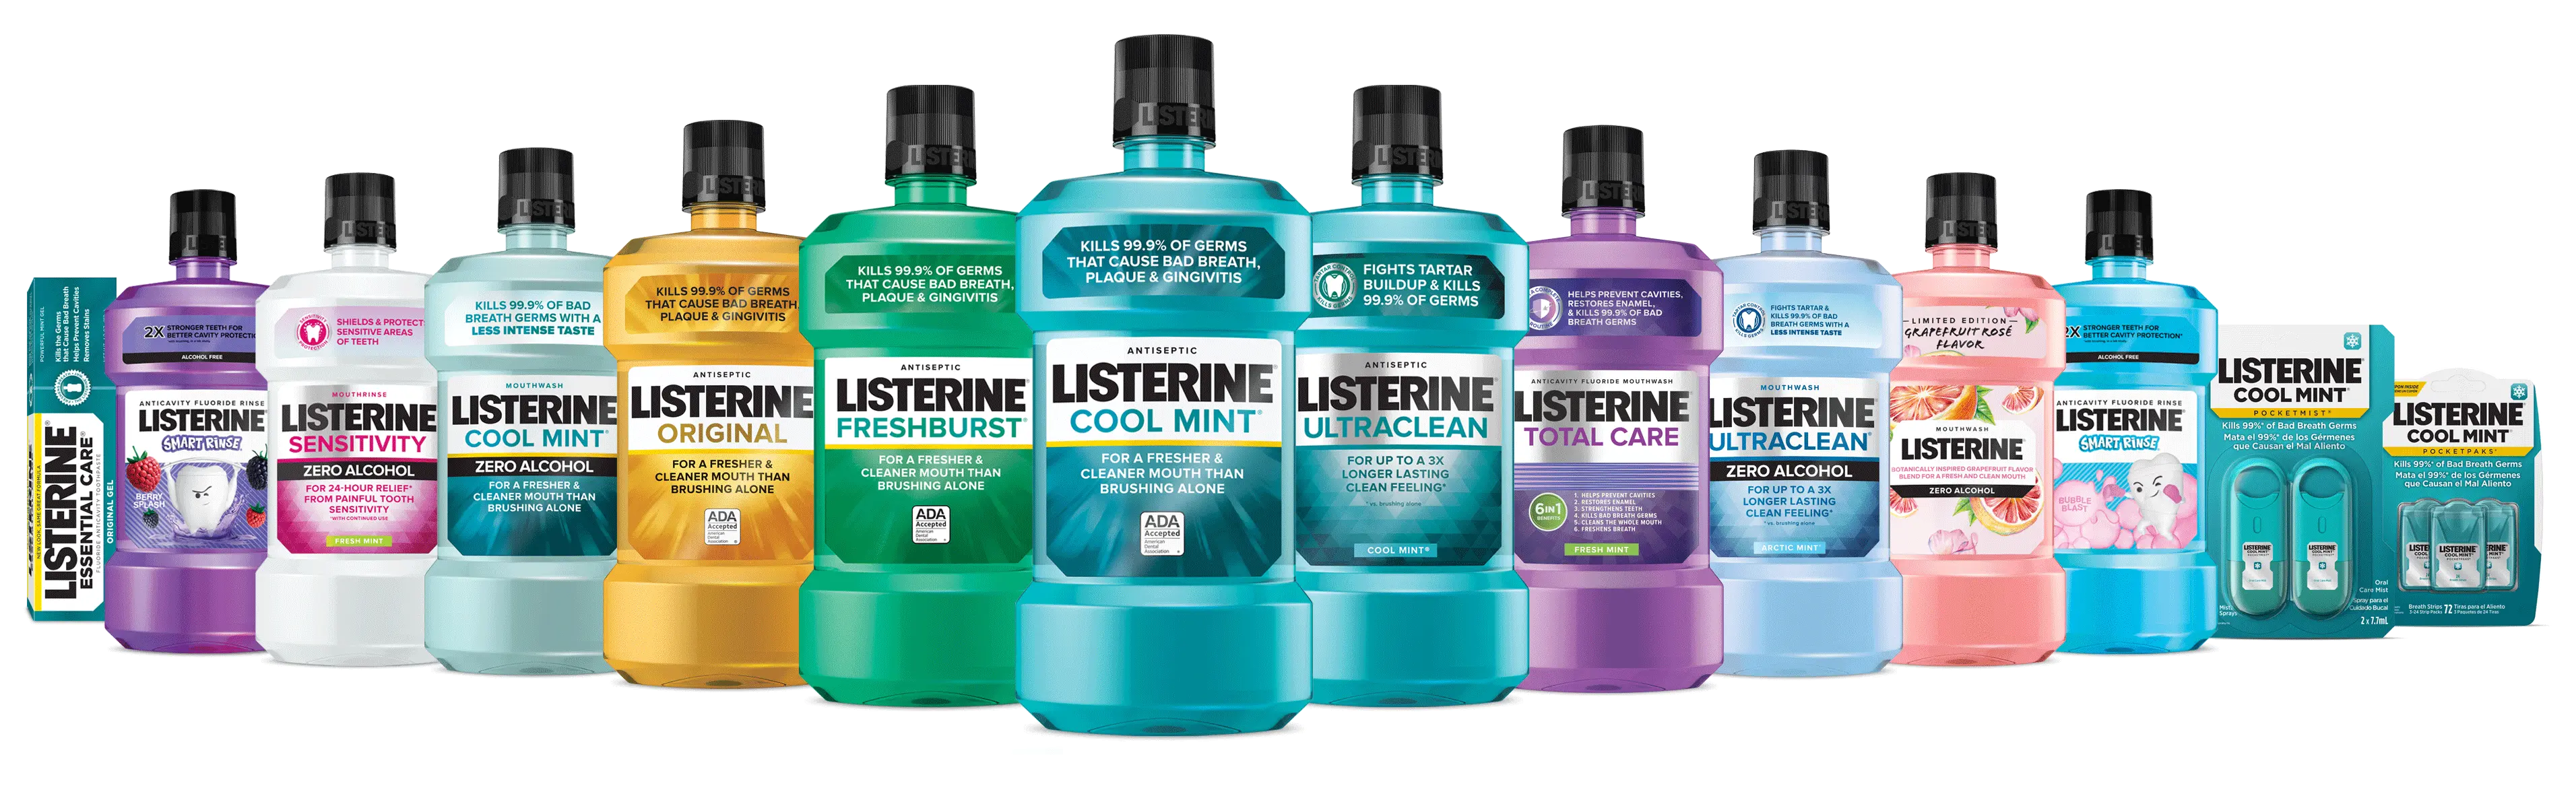 Listerine products in a row